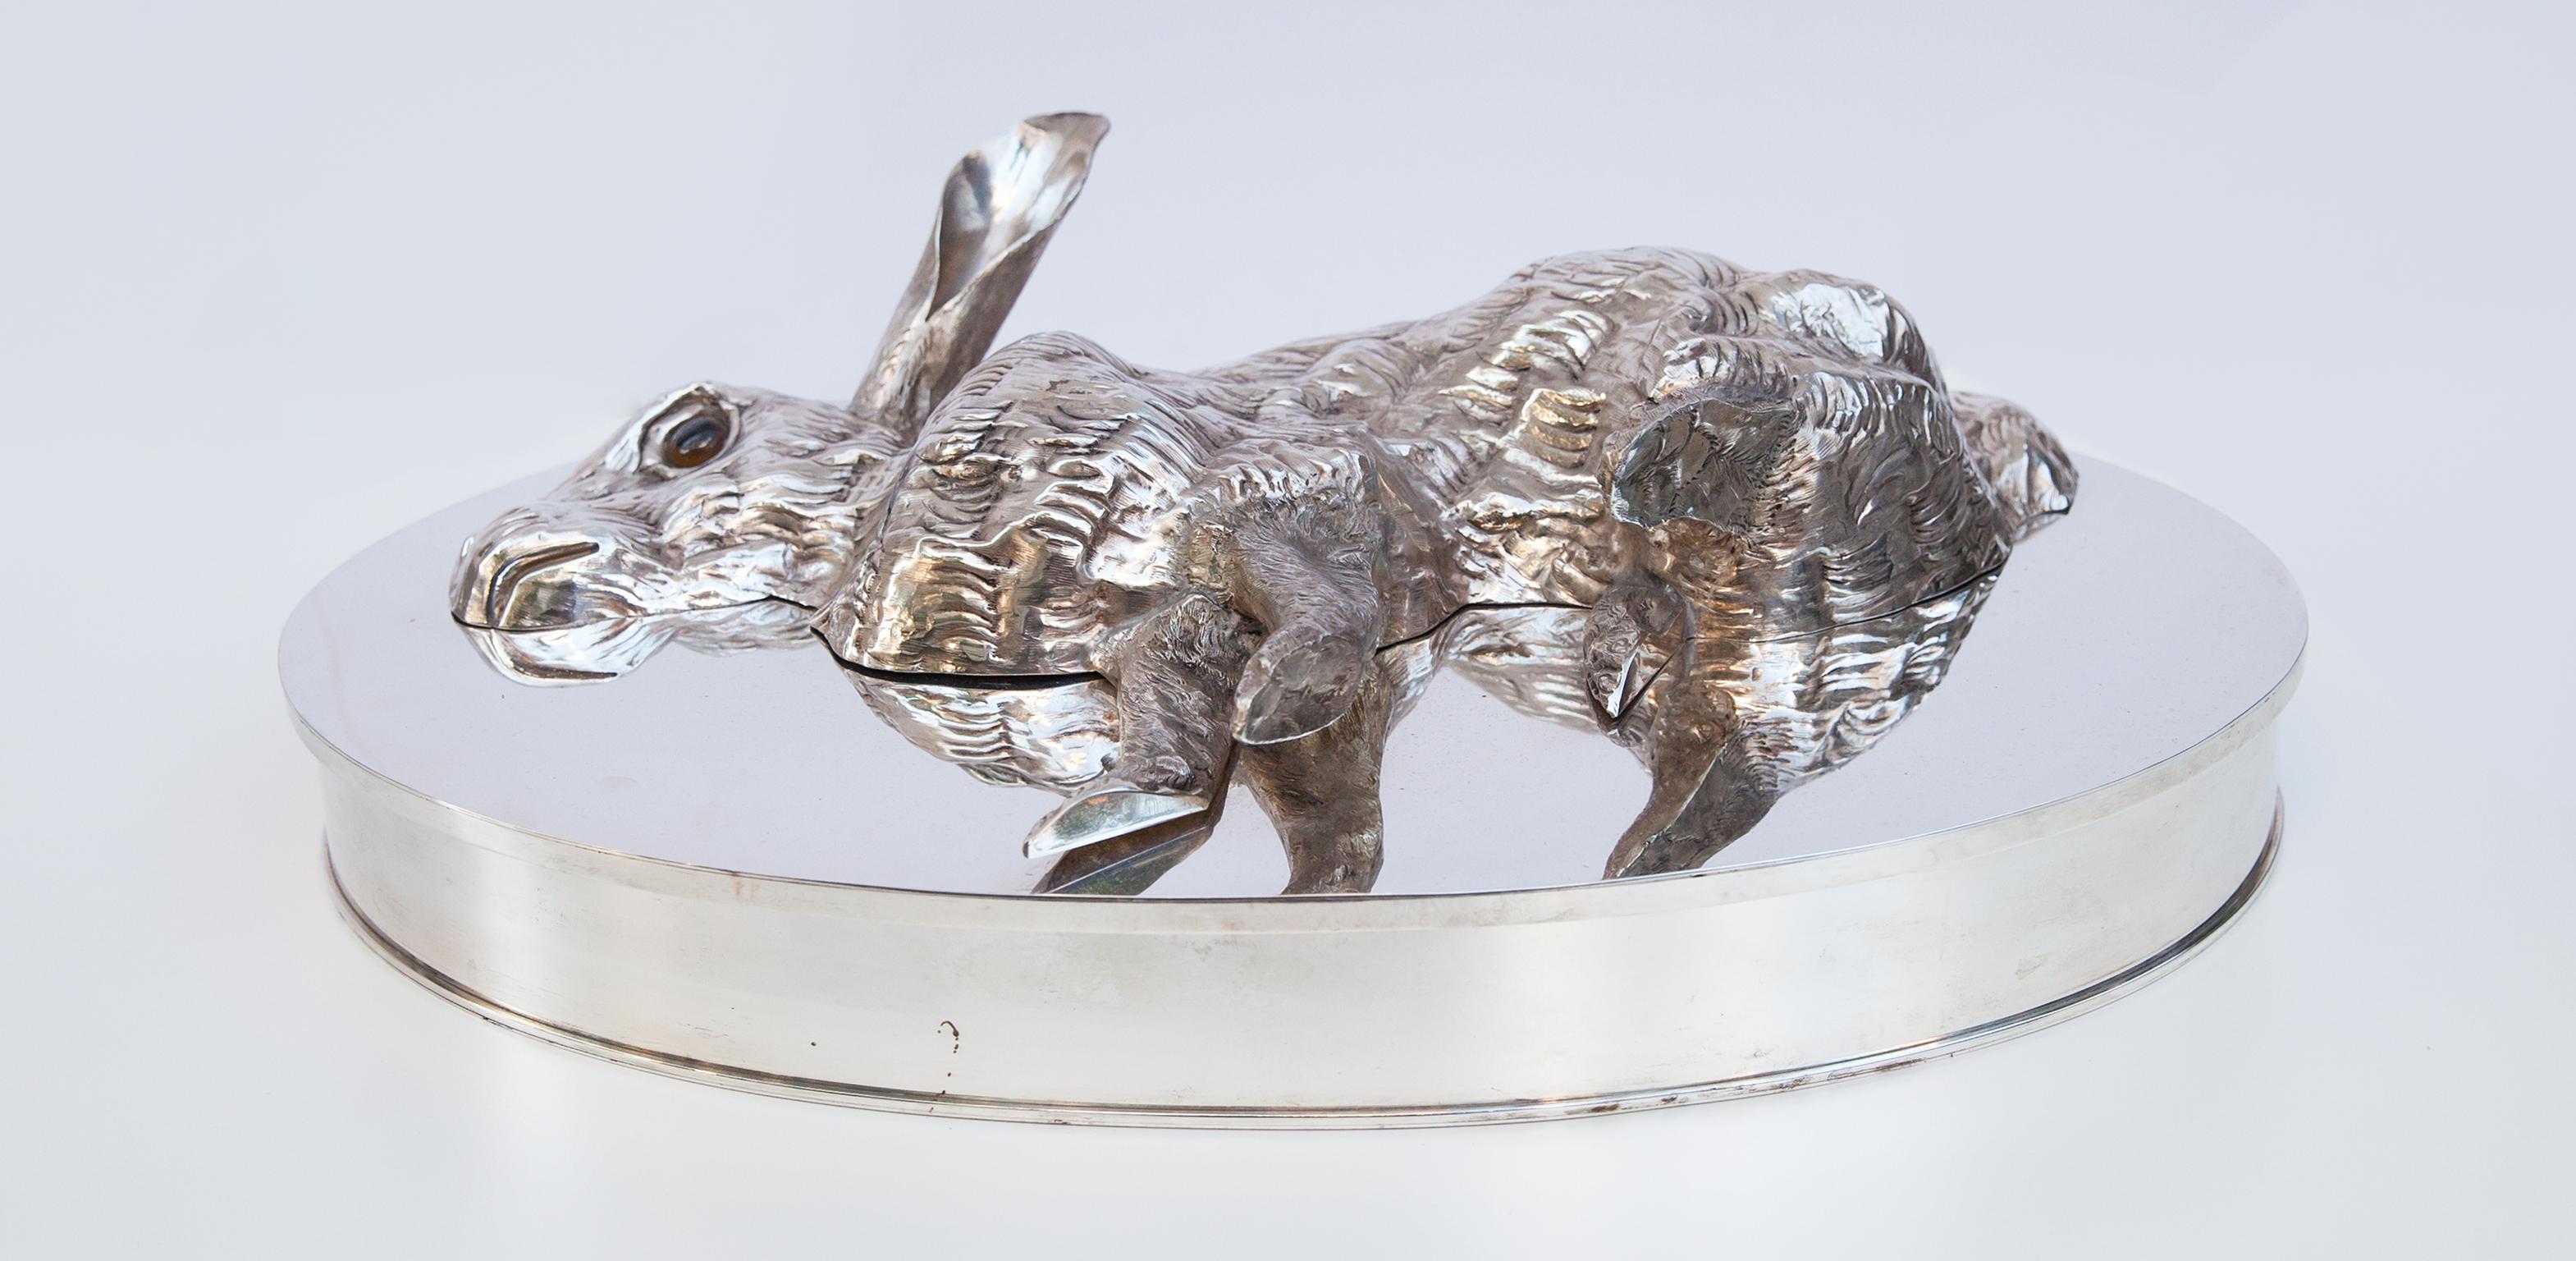 The Unique Franco Lapini exquisite rabbit serving platter is made entirely of silver plated brass. The large deep oval plate is perfect for presented a luxury meal on your dining table for your best friends or just as a decorative object in your